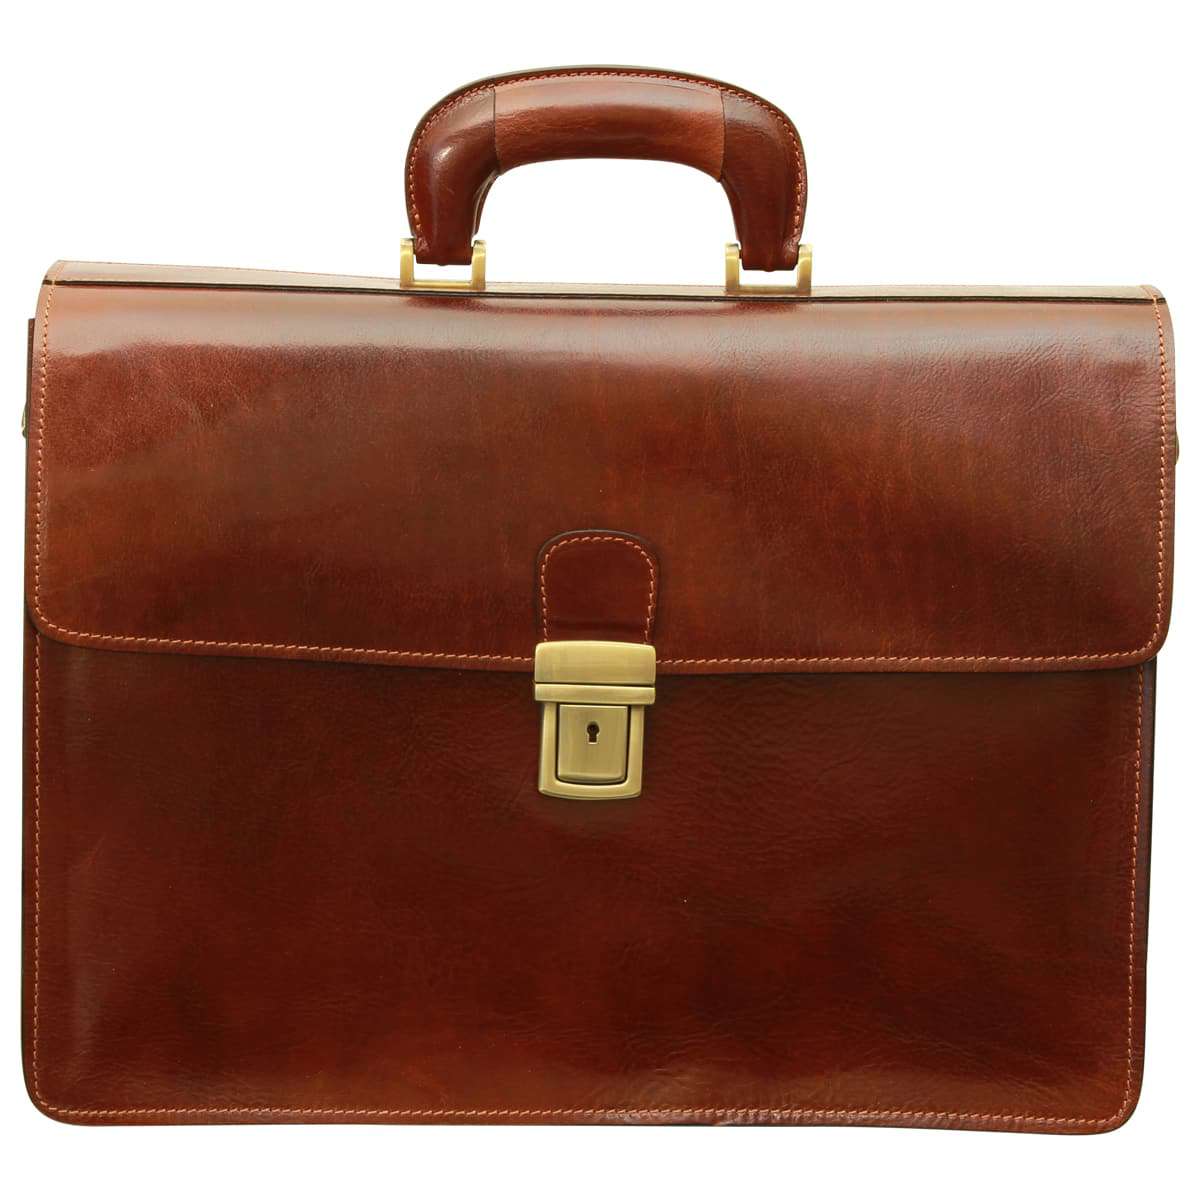 Leather Briefcase with secure clip closure - Brown | 077905MA US | Old Angler Firenze